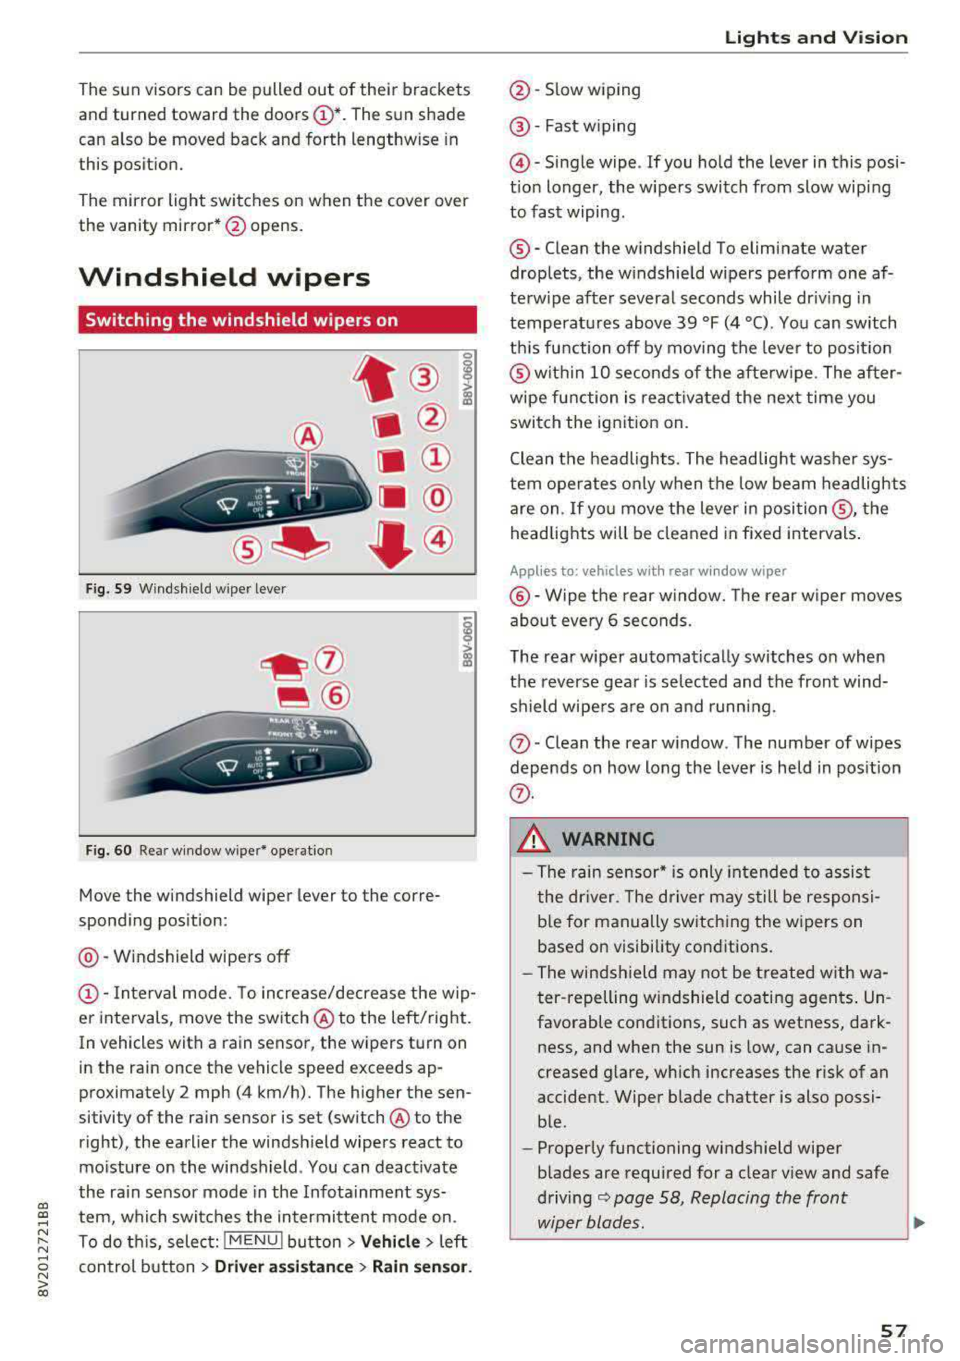 AUDI A3 SEDAN 2017 Workshop Manual a,  a, ..... N 
" N ..... 0 N > 00 
The  sun  visors  can  be  pulled  out  of  their  brackets  
and  turned  toward  the  doors 
(D *. The  sun  shade 
can  also  be  moved  back  and  forth  length